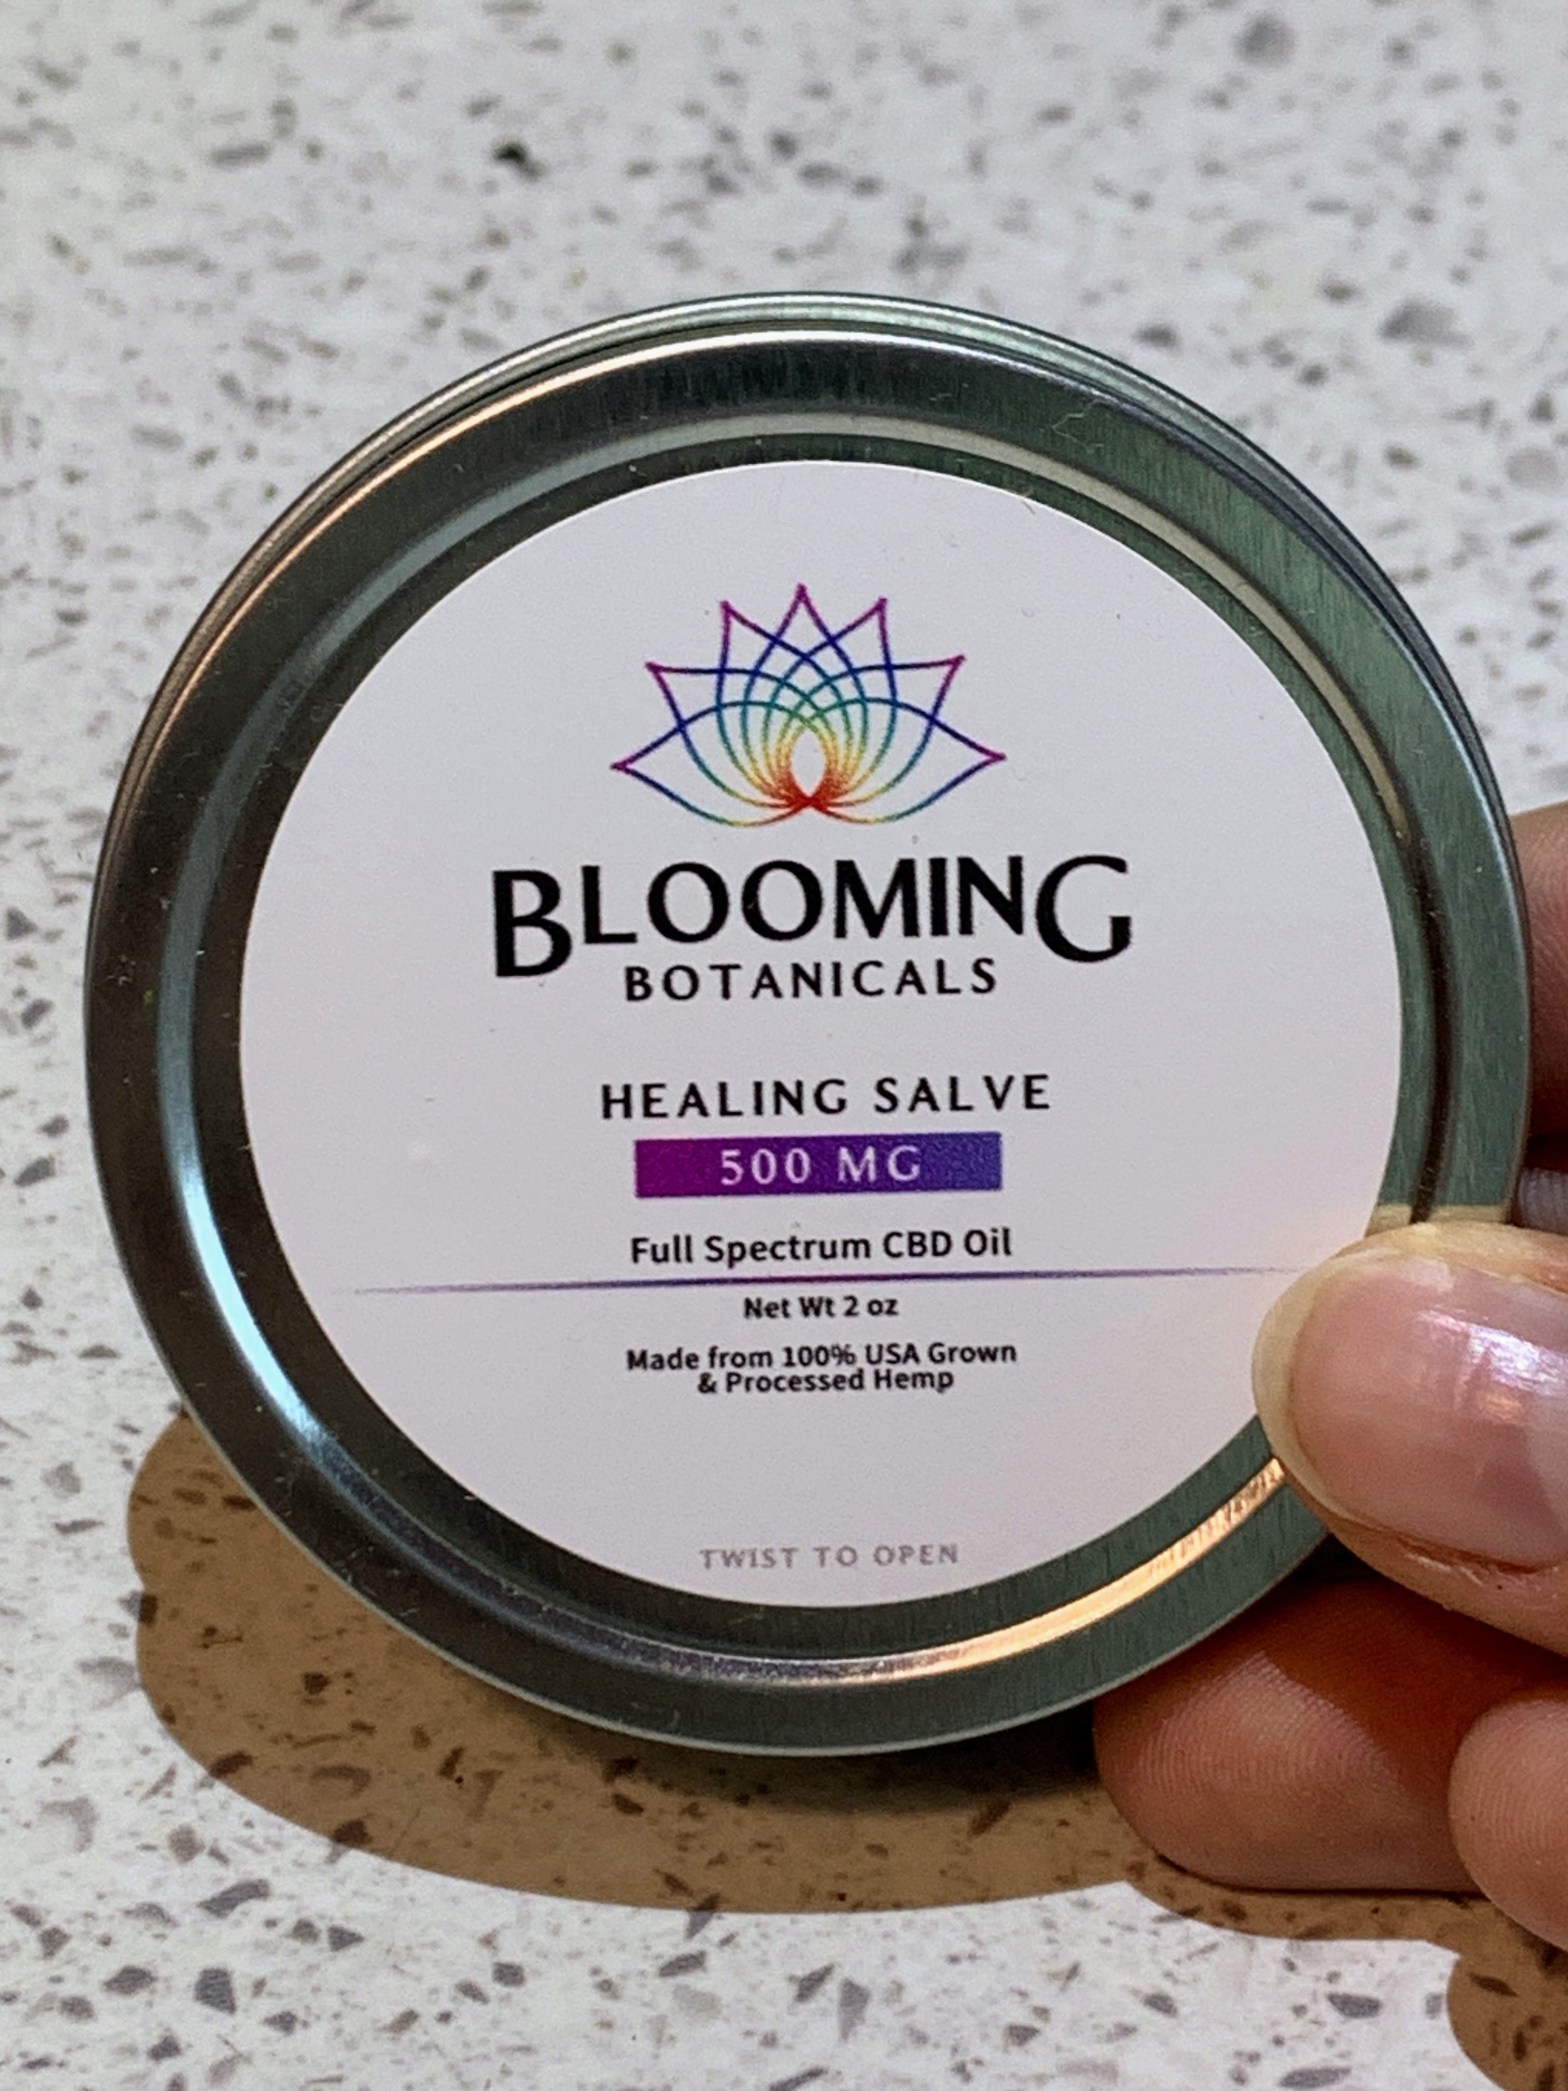 blooming botanicals healing salve held against a white countertop